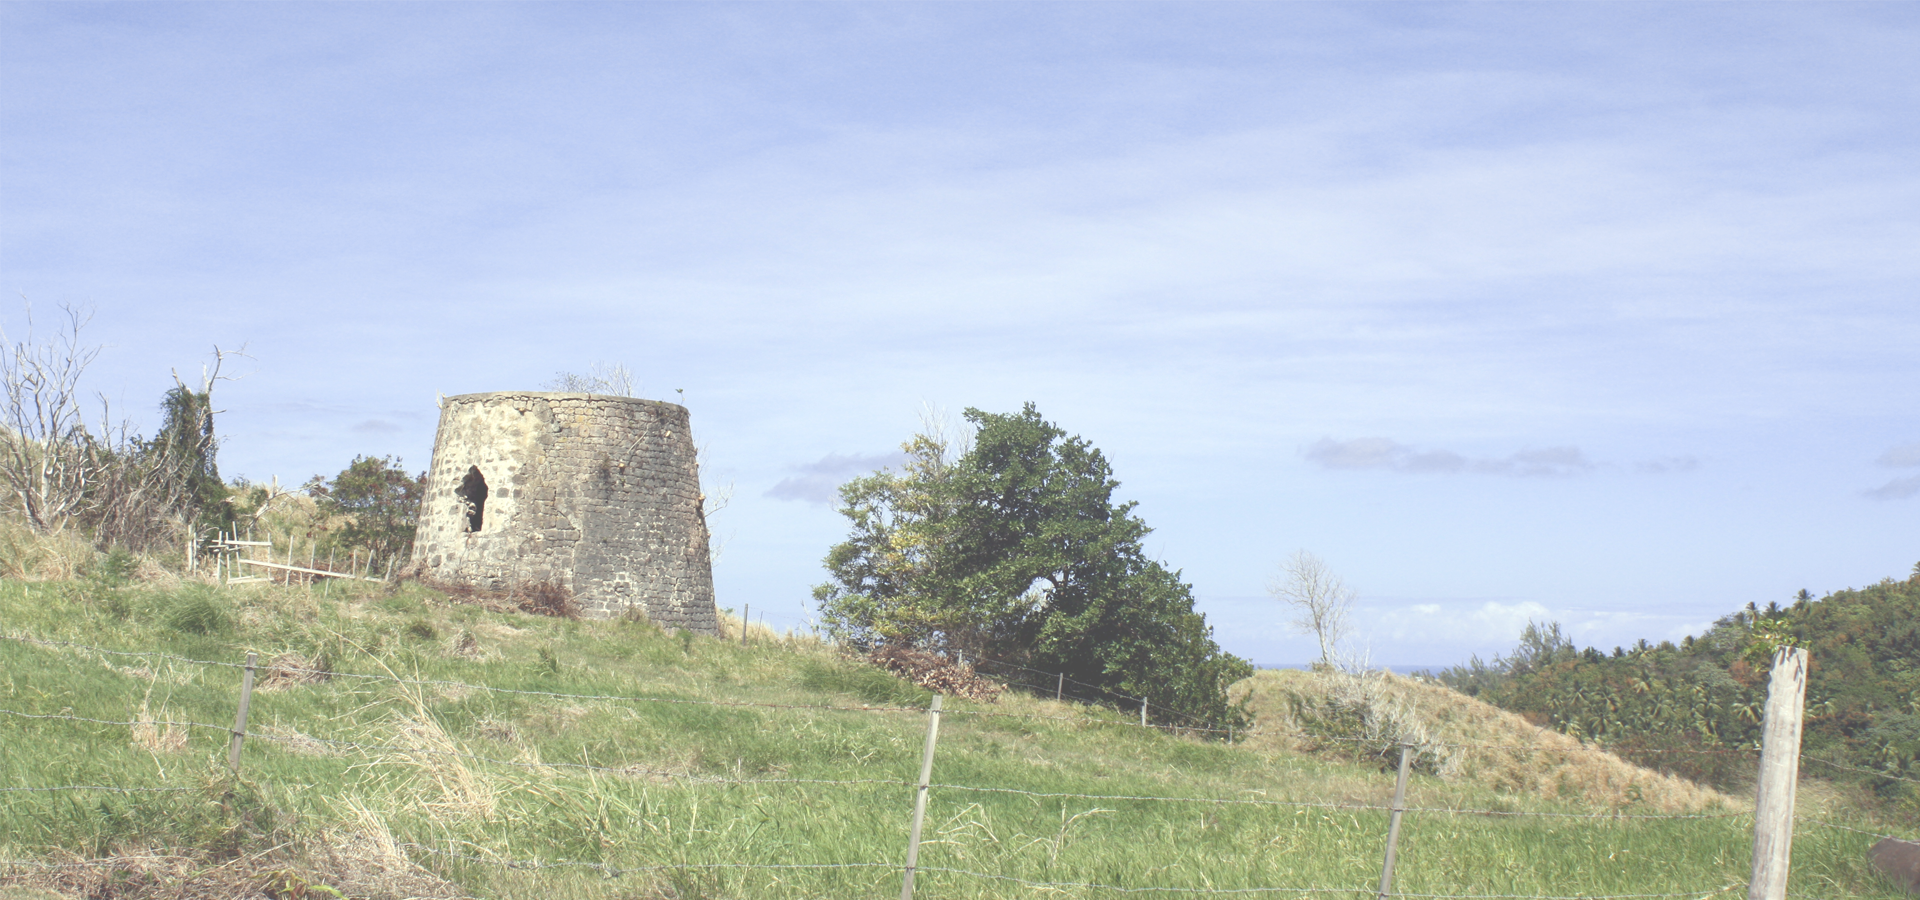 Ruined tower mill in Saint Andrew Parish, Barbados